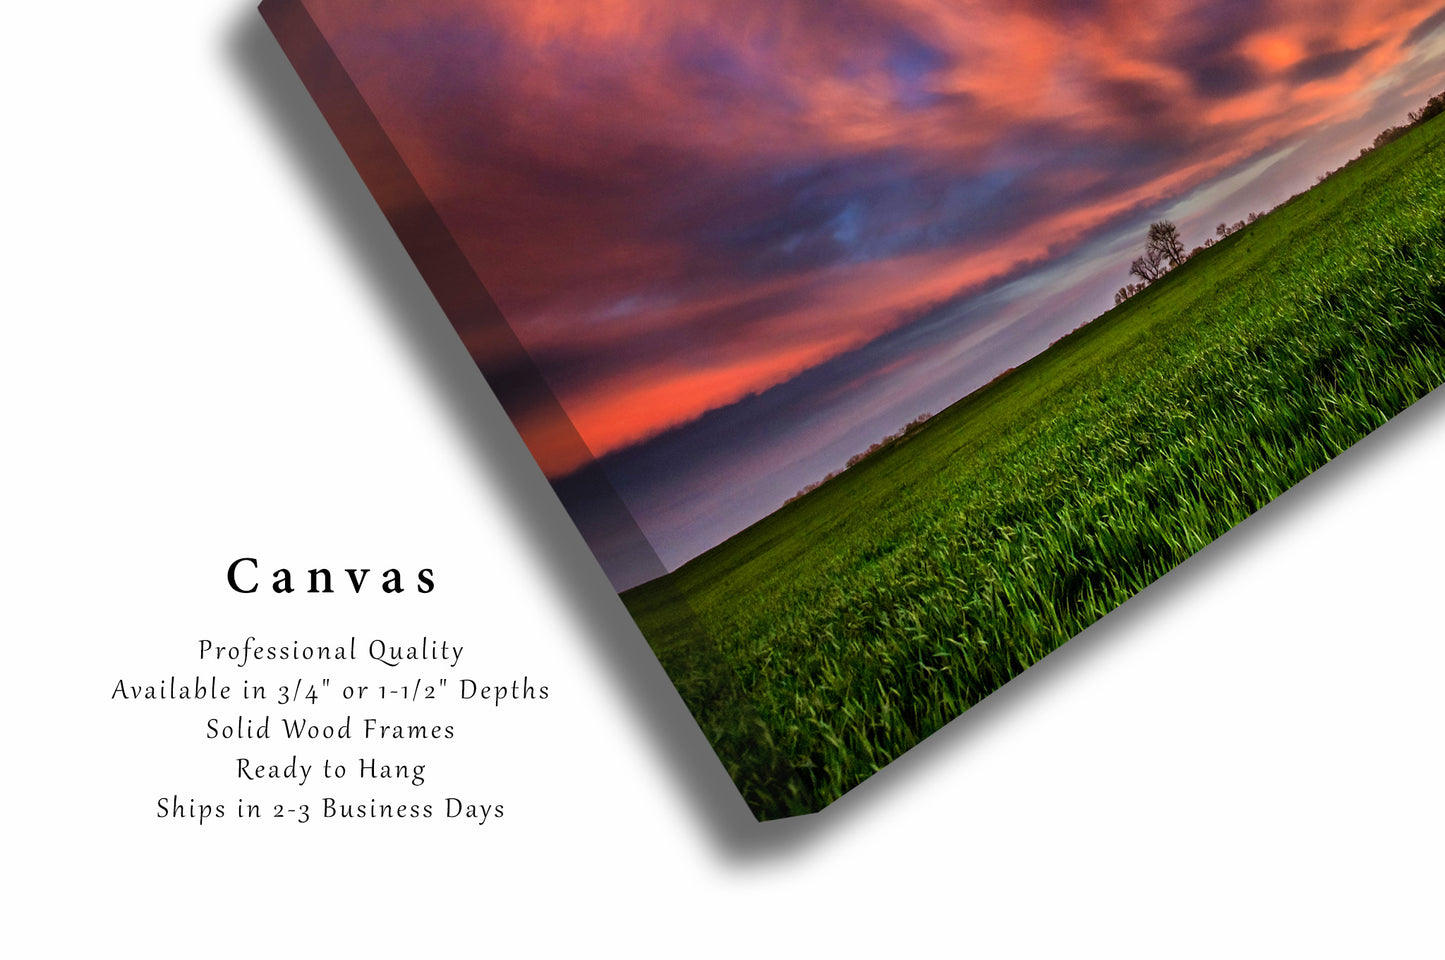 Colorful Clouds at Sunset Canvas | Scenic Sky Gallery Wrap | Oklahoma Photography | Great Plains Wall Art | Nature Decor | Ready to Hang